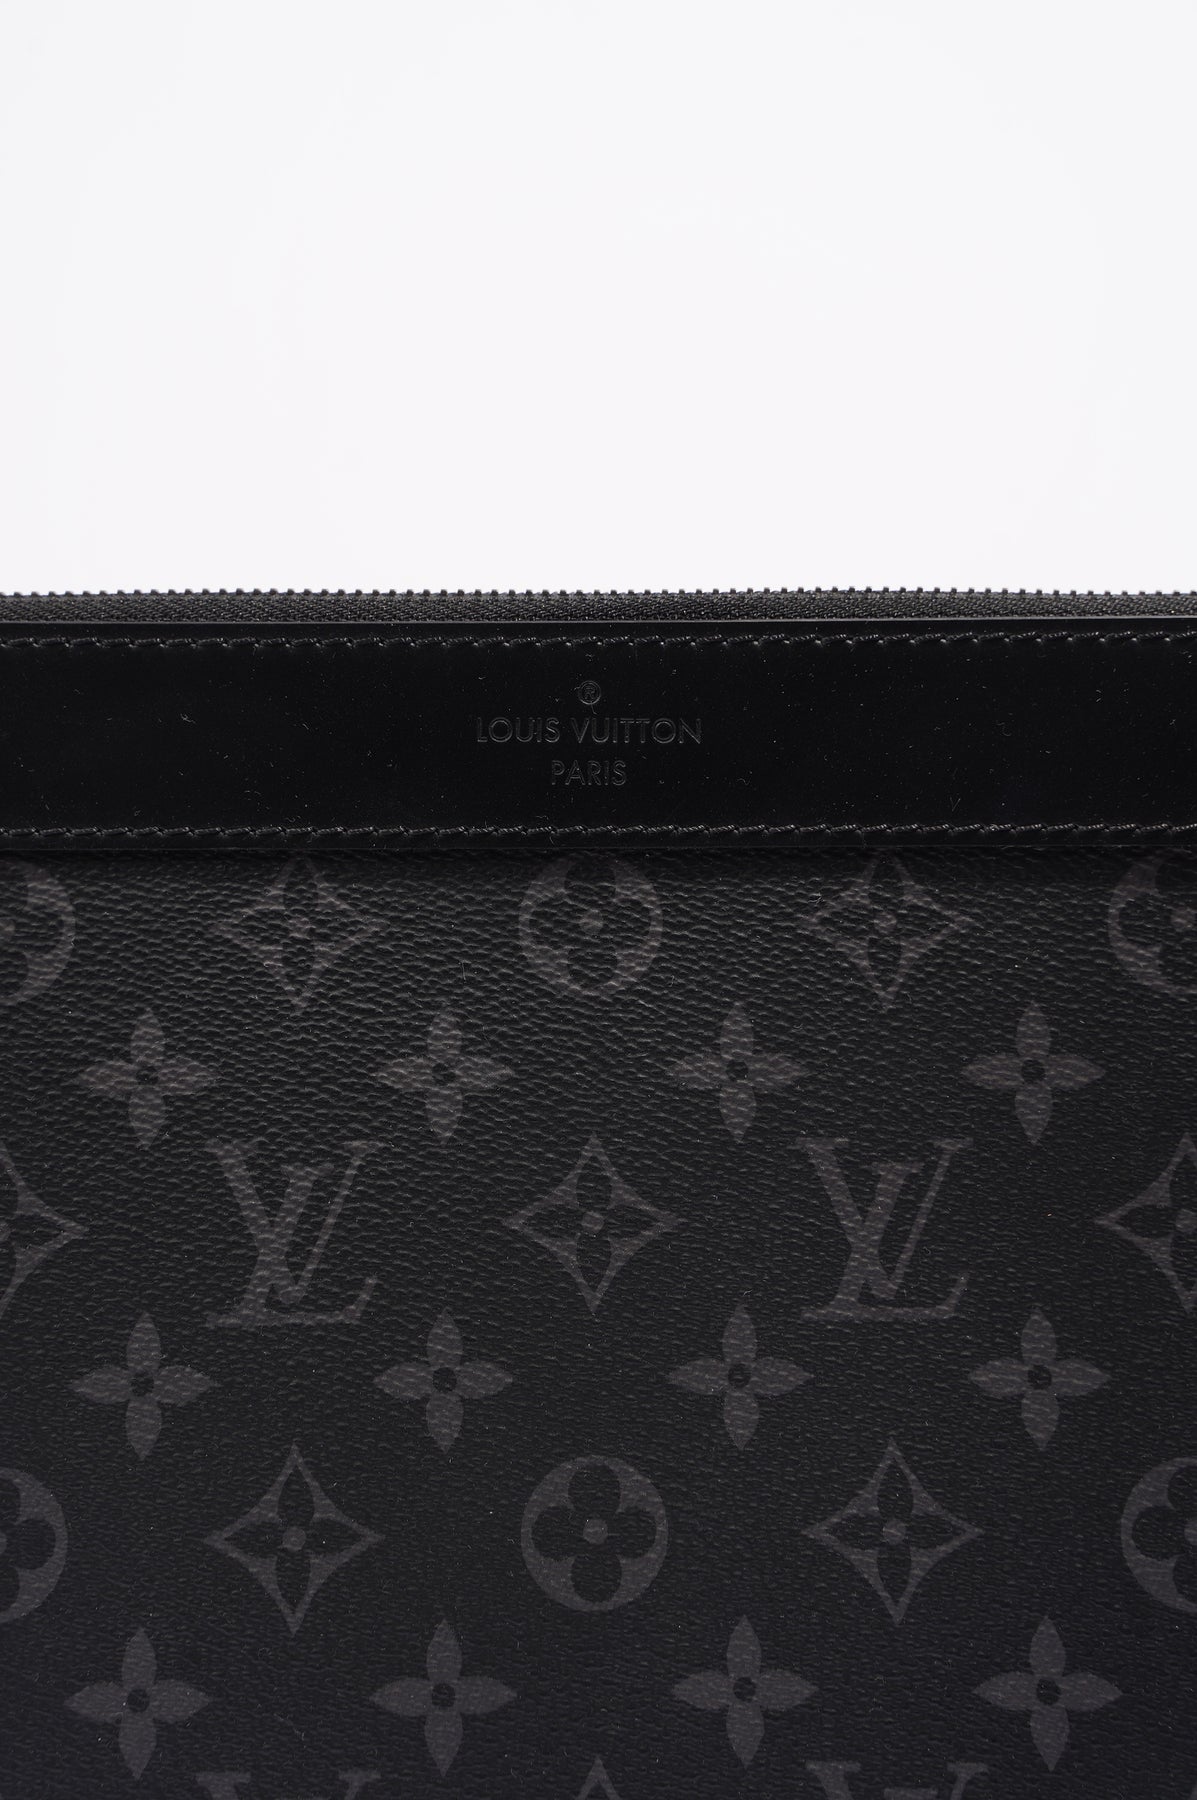 Shop Louis Vuitton Discovery Discovery pochette (M62903) by 環